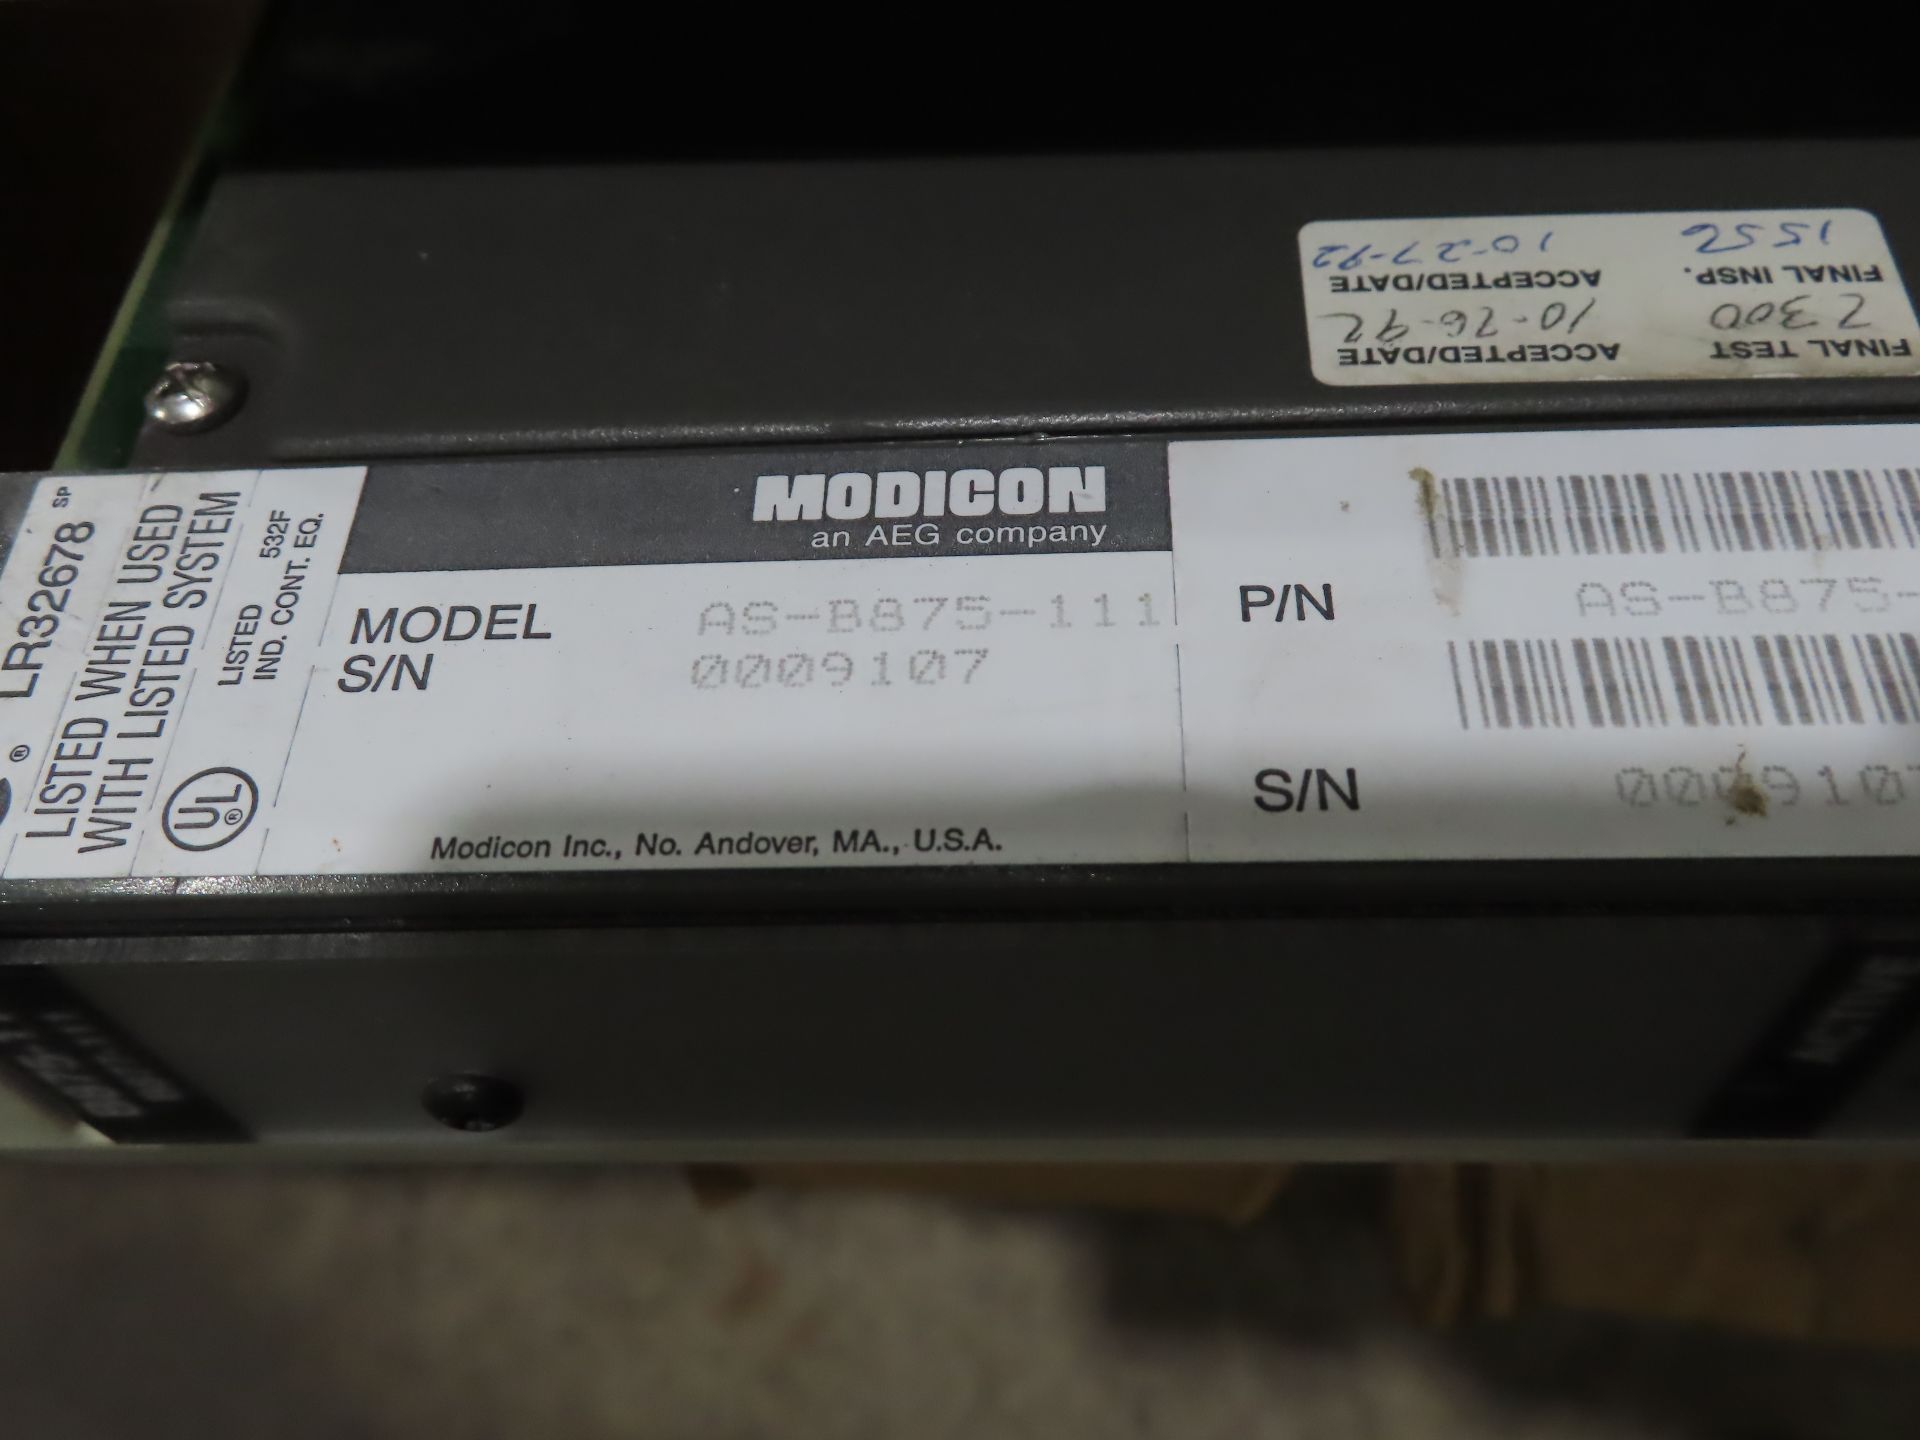 Qty 3 AEG Modicon model AS-B875-111, as always, with Brolyn LLC auctions, all lots can be picked - Image 2 of 2